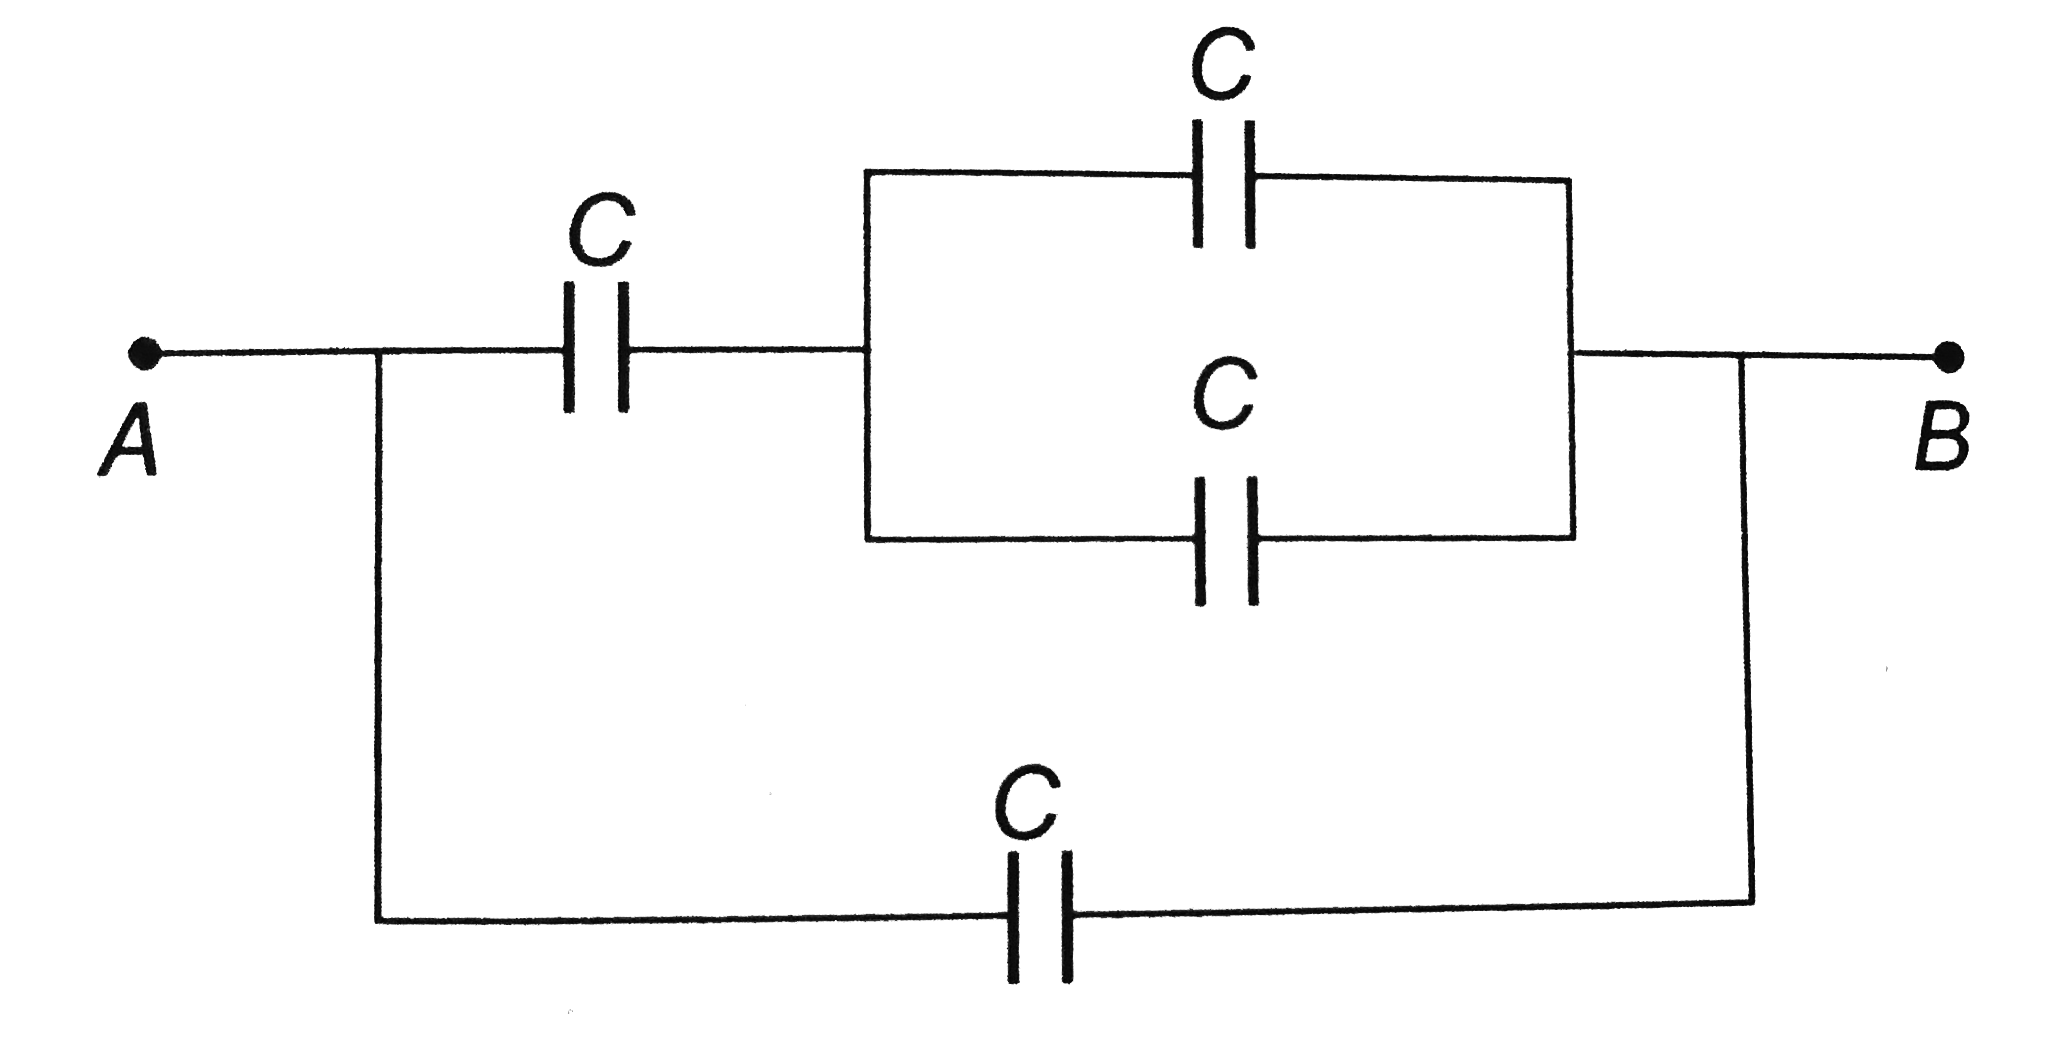 Four equal capacitors, each of capacity C, are arranged as shown. The effective capacitance between A and B is